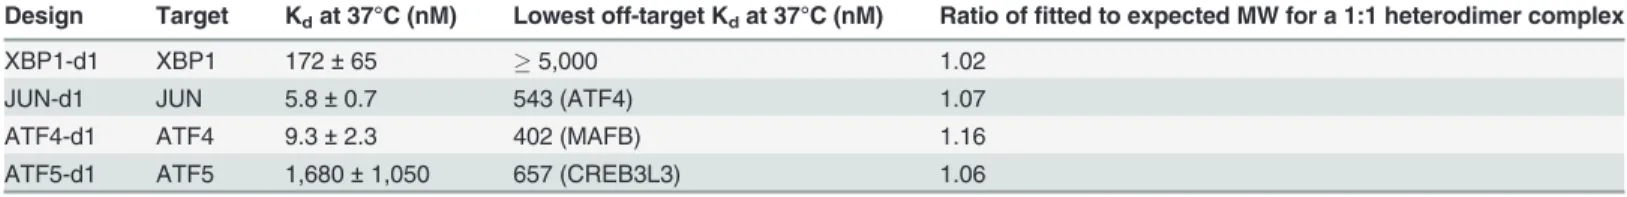 Table 4. Molecular weights of designed bZIP complexes determined by analytical ultracentrifugation.